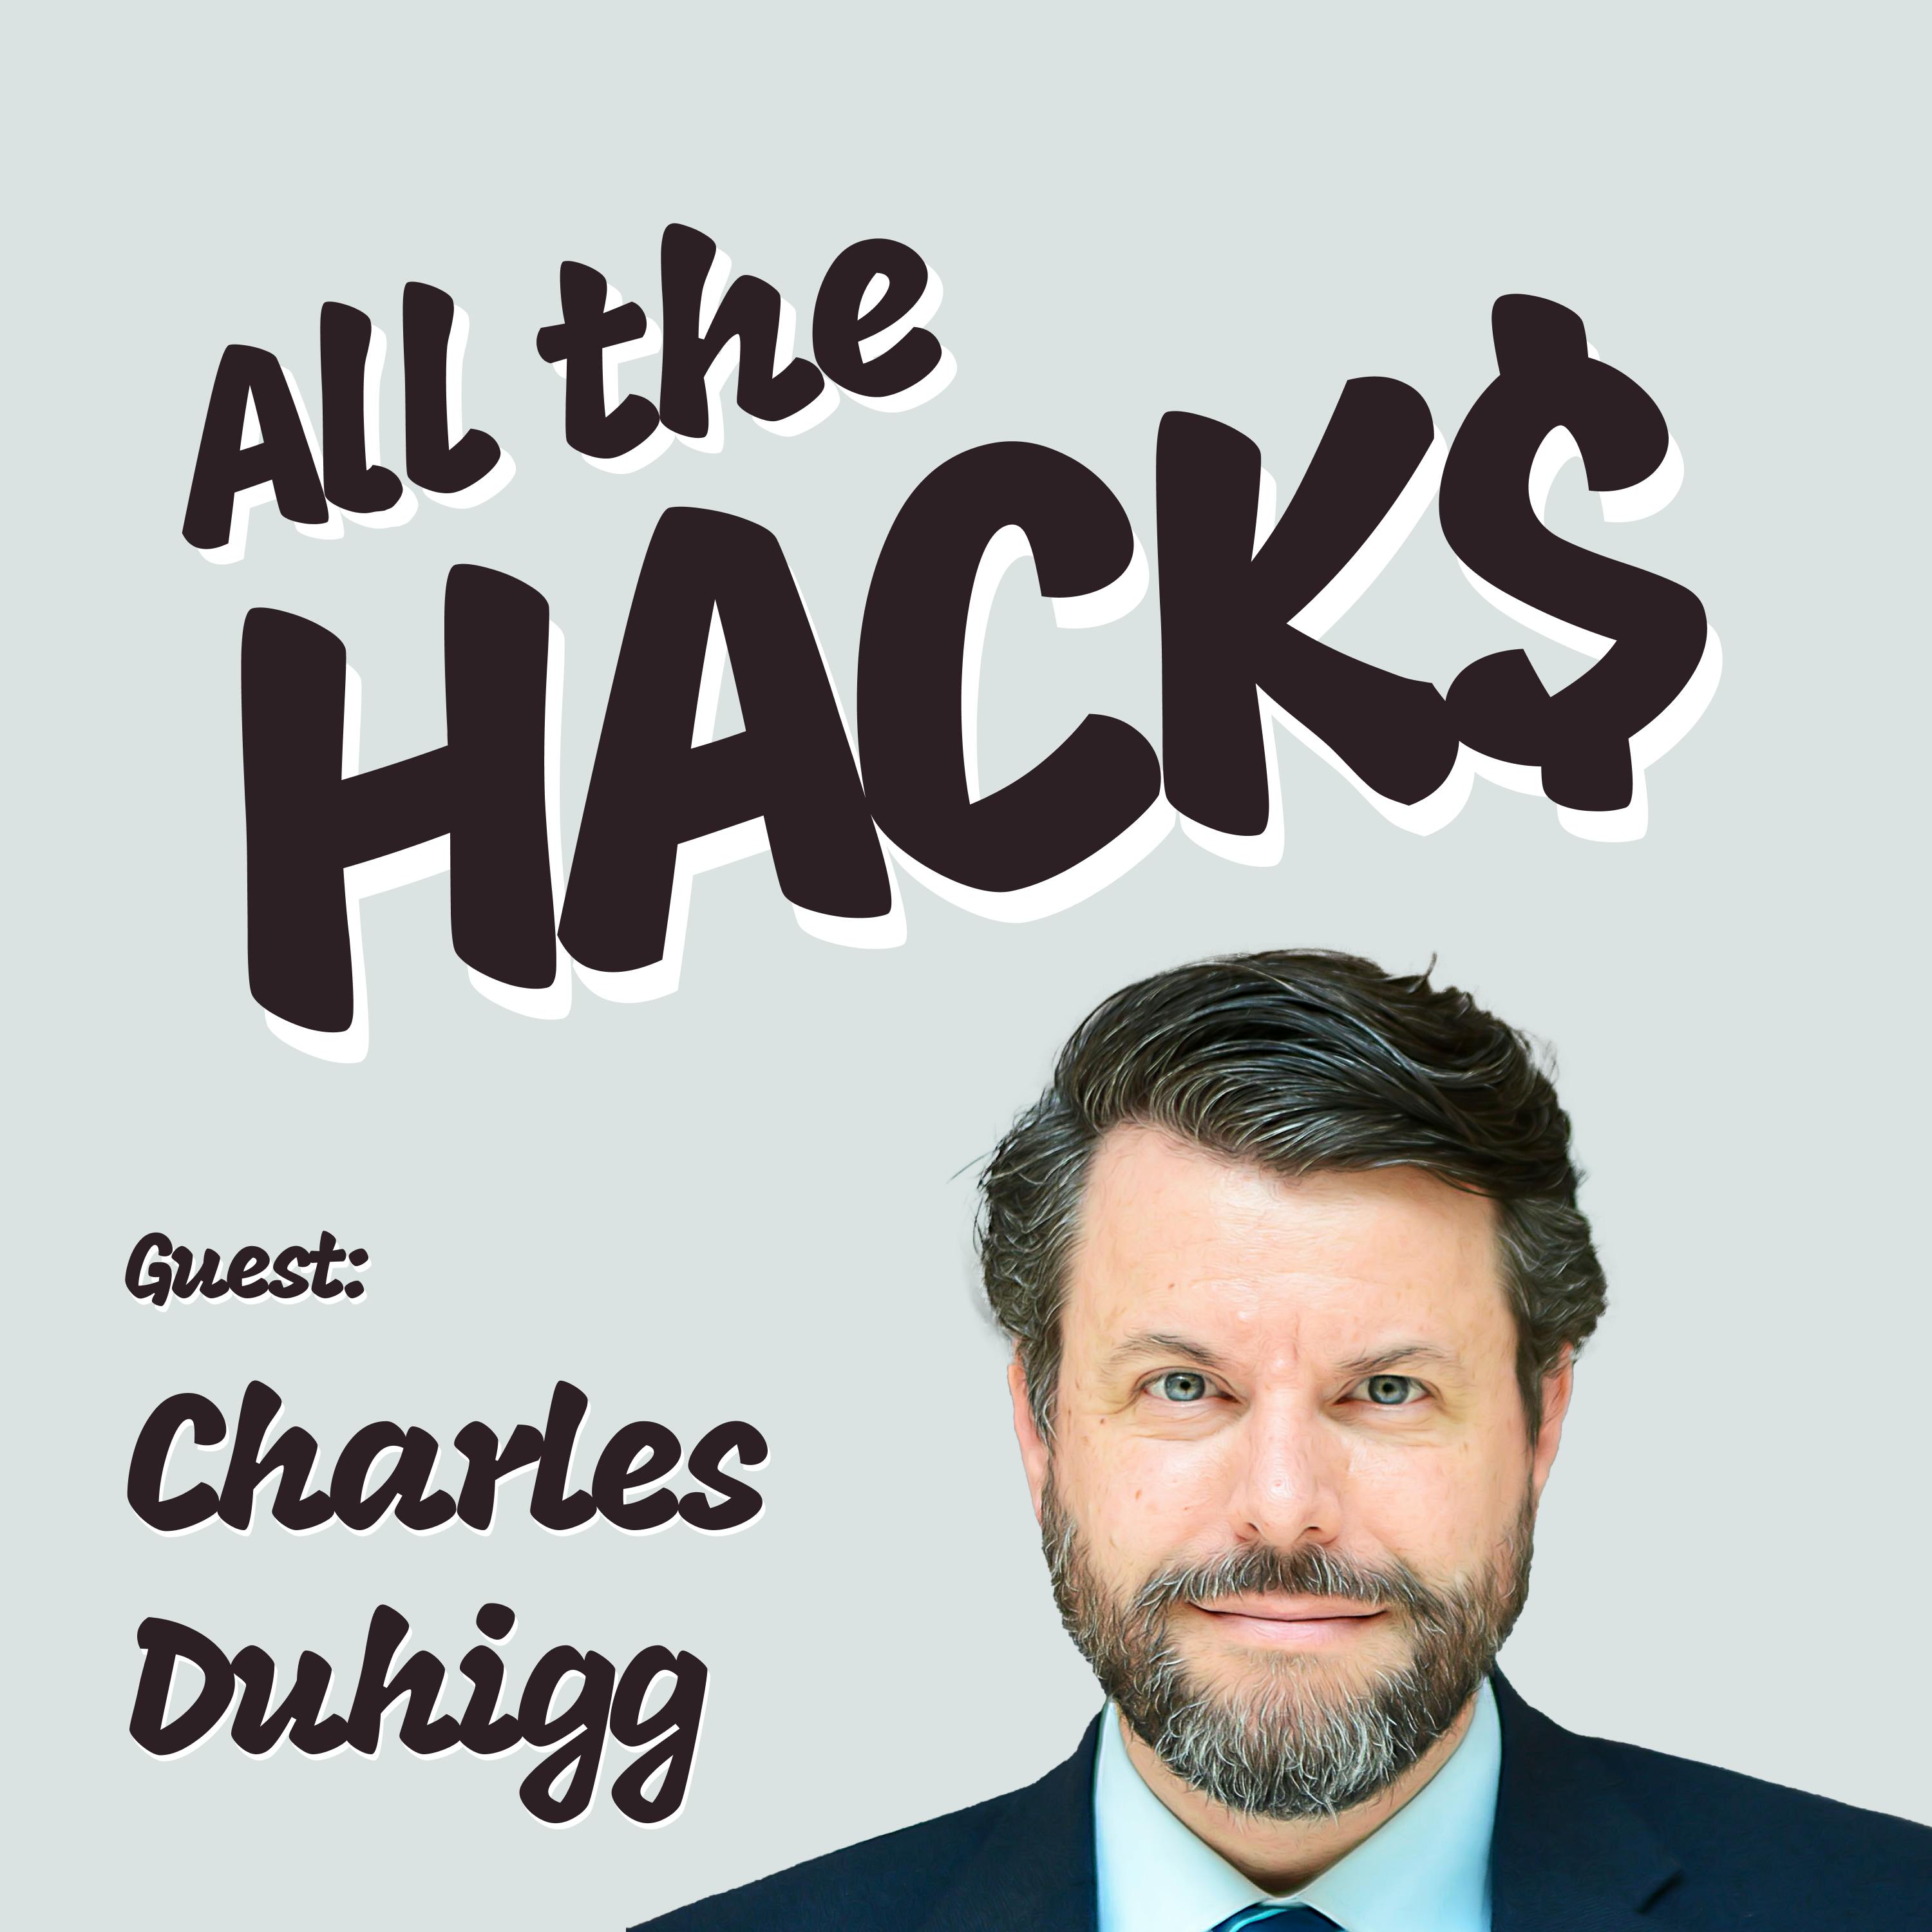 Masterclass on Habits and Becoming a Super Communicator with Charles Duhigg